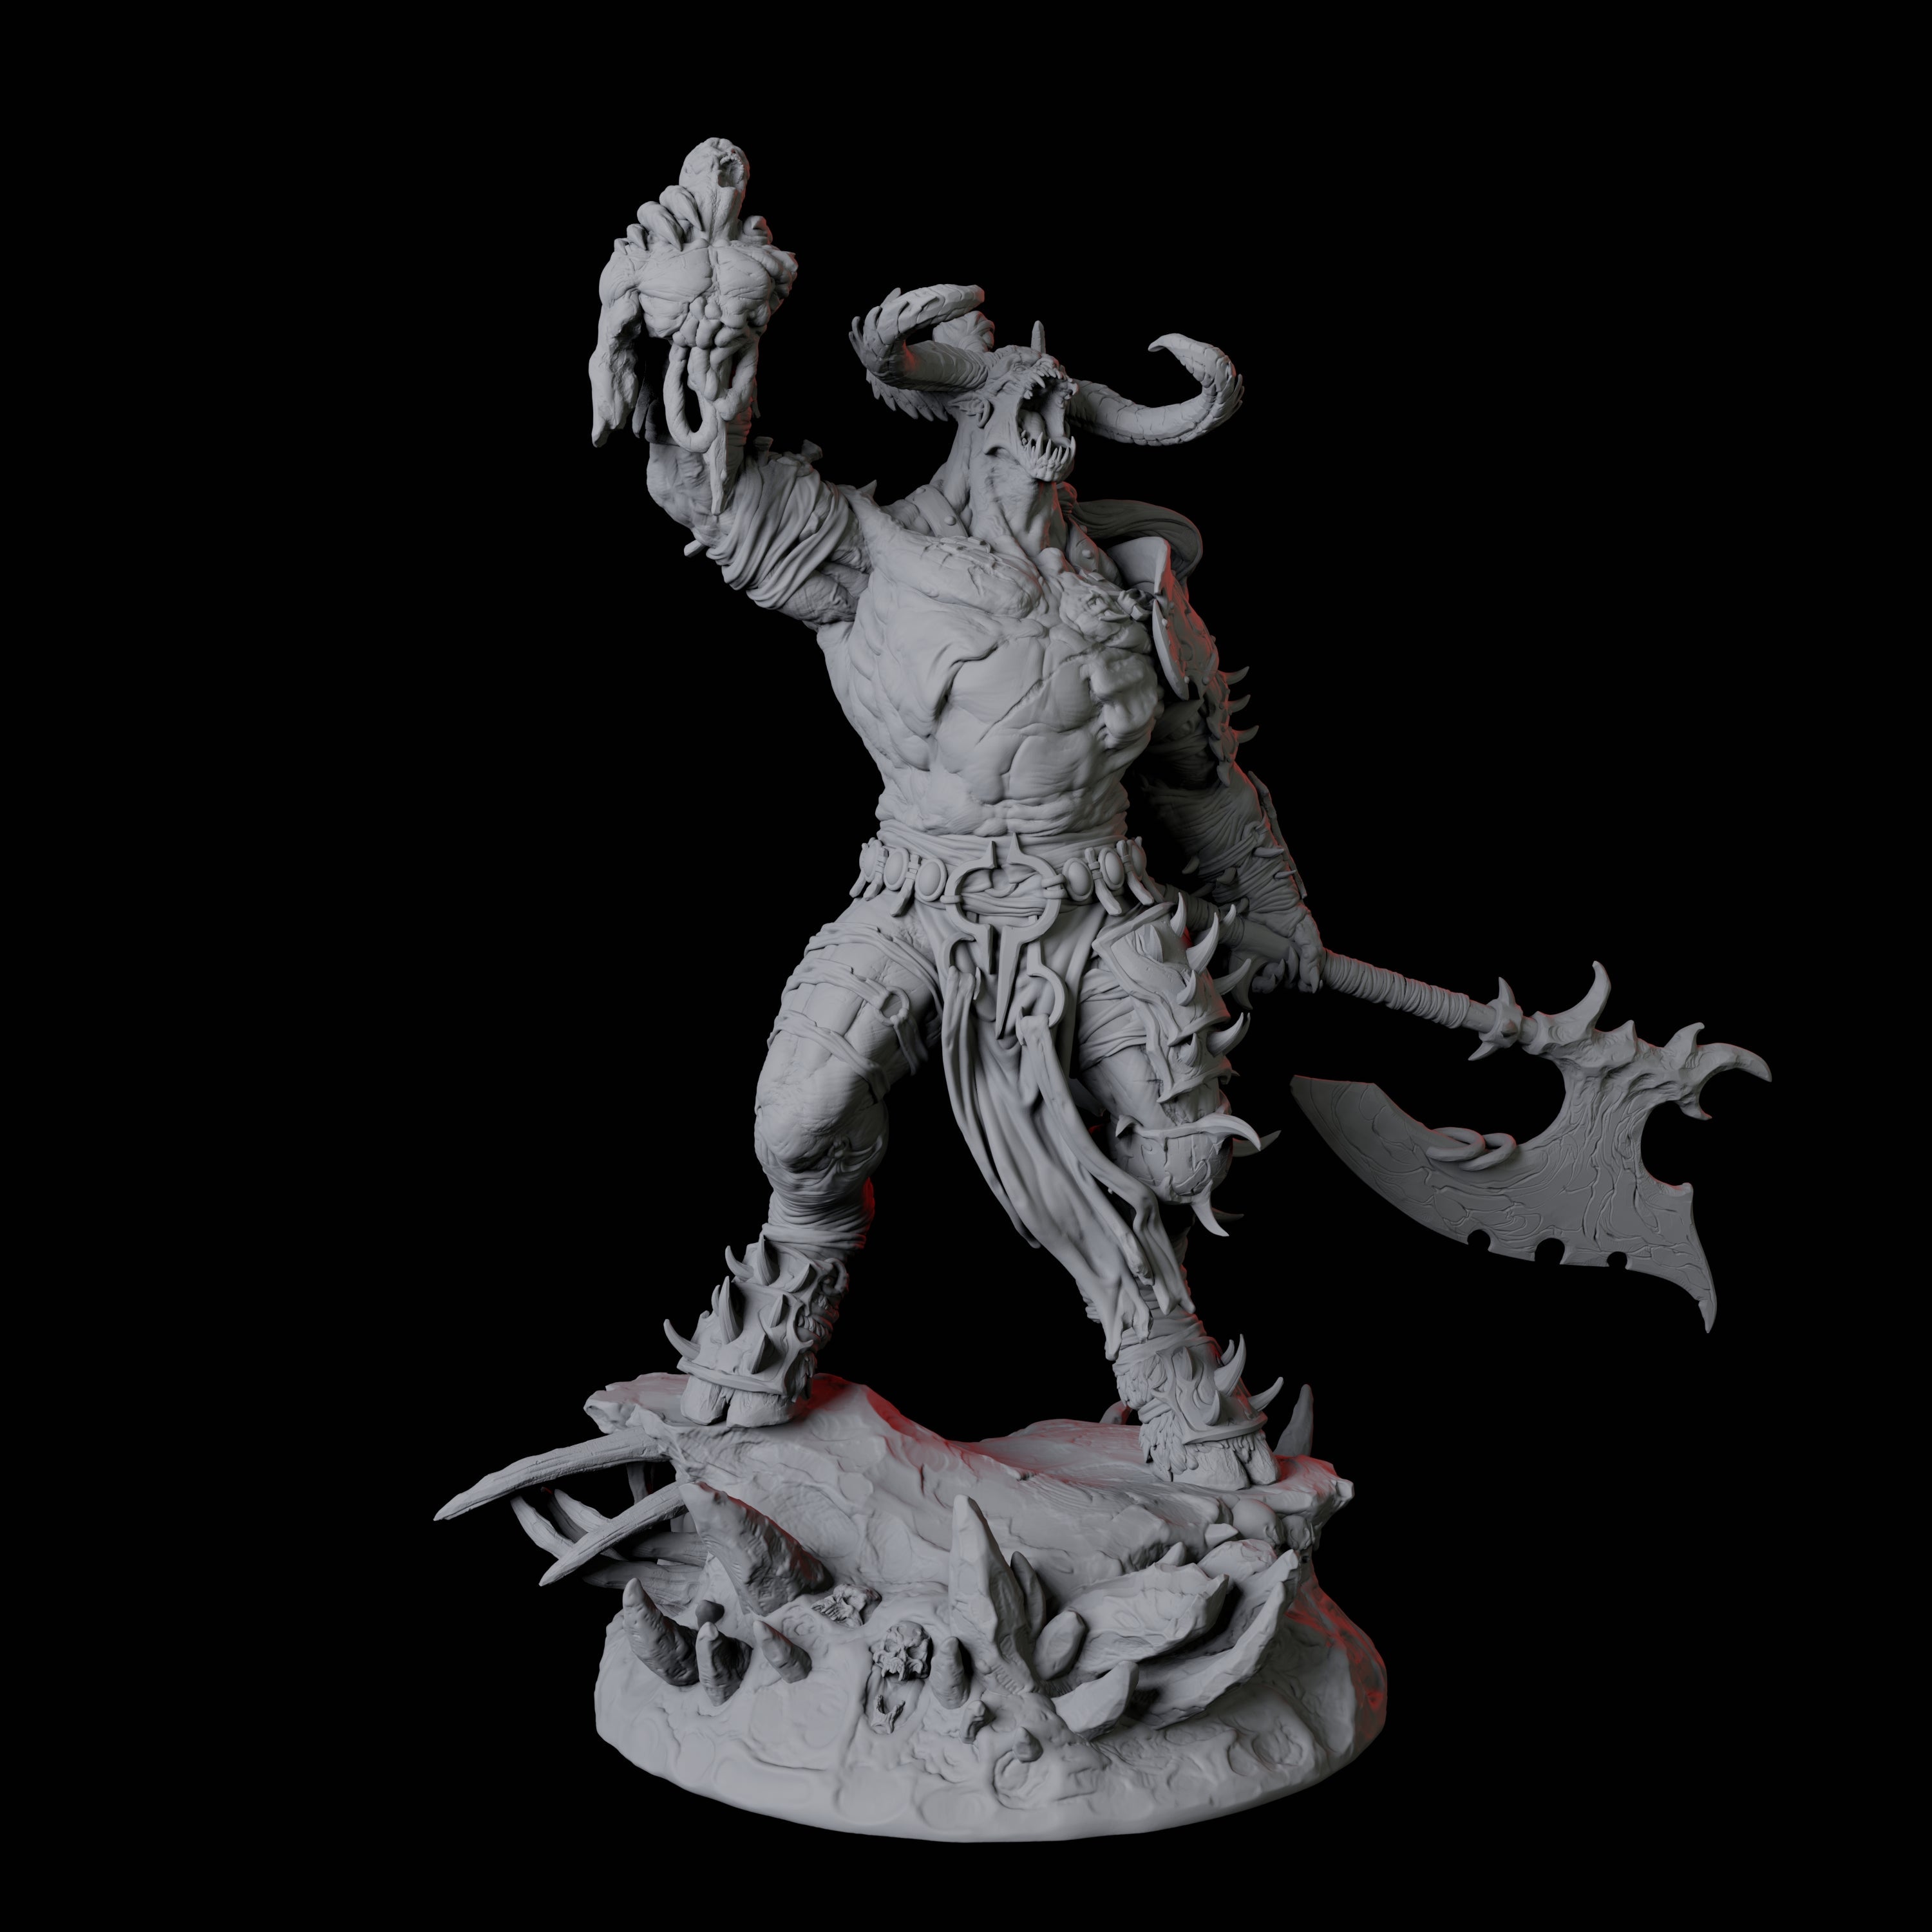 Savage Roru Demon B Miniature for Dungeons and Dragons, Pathfinder or other TTRPGs